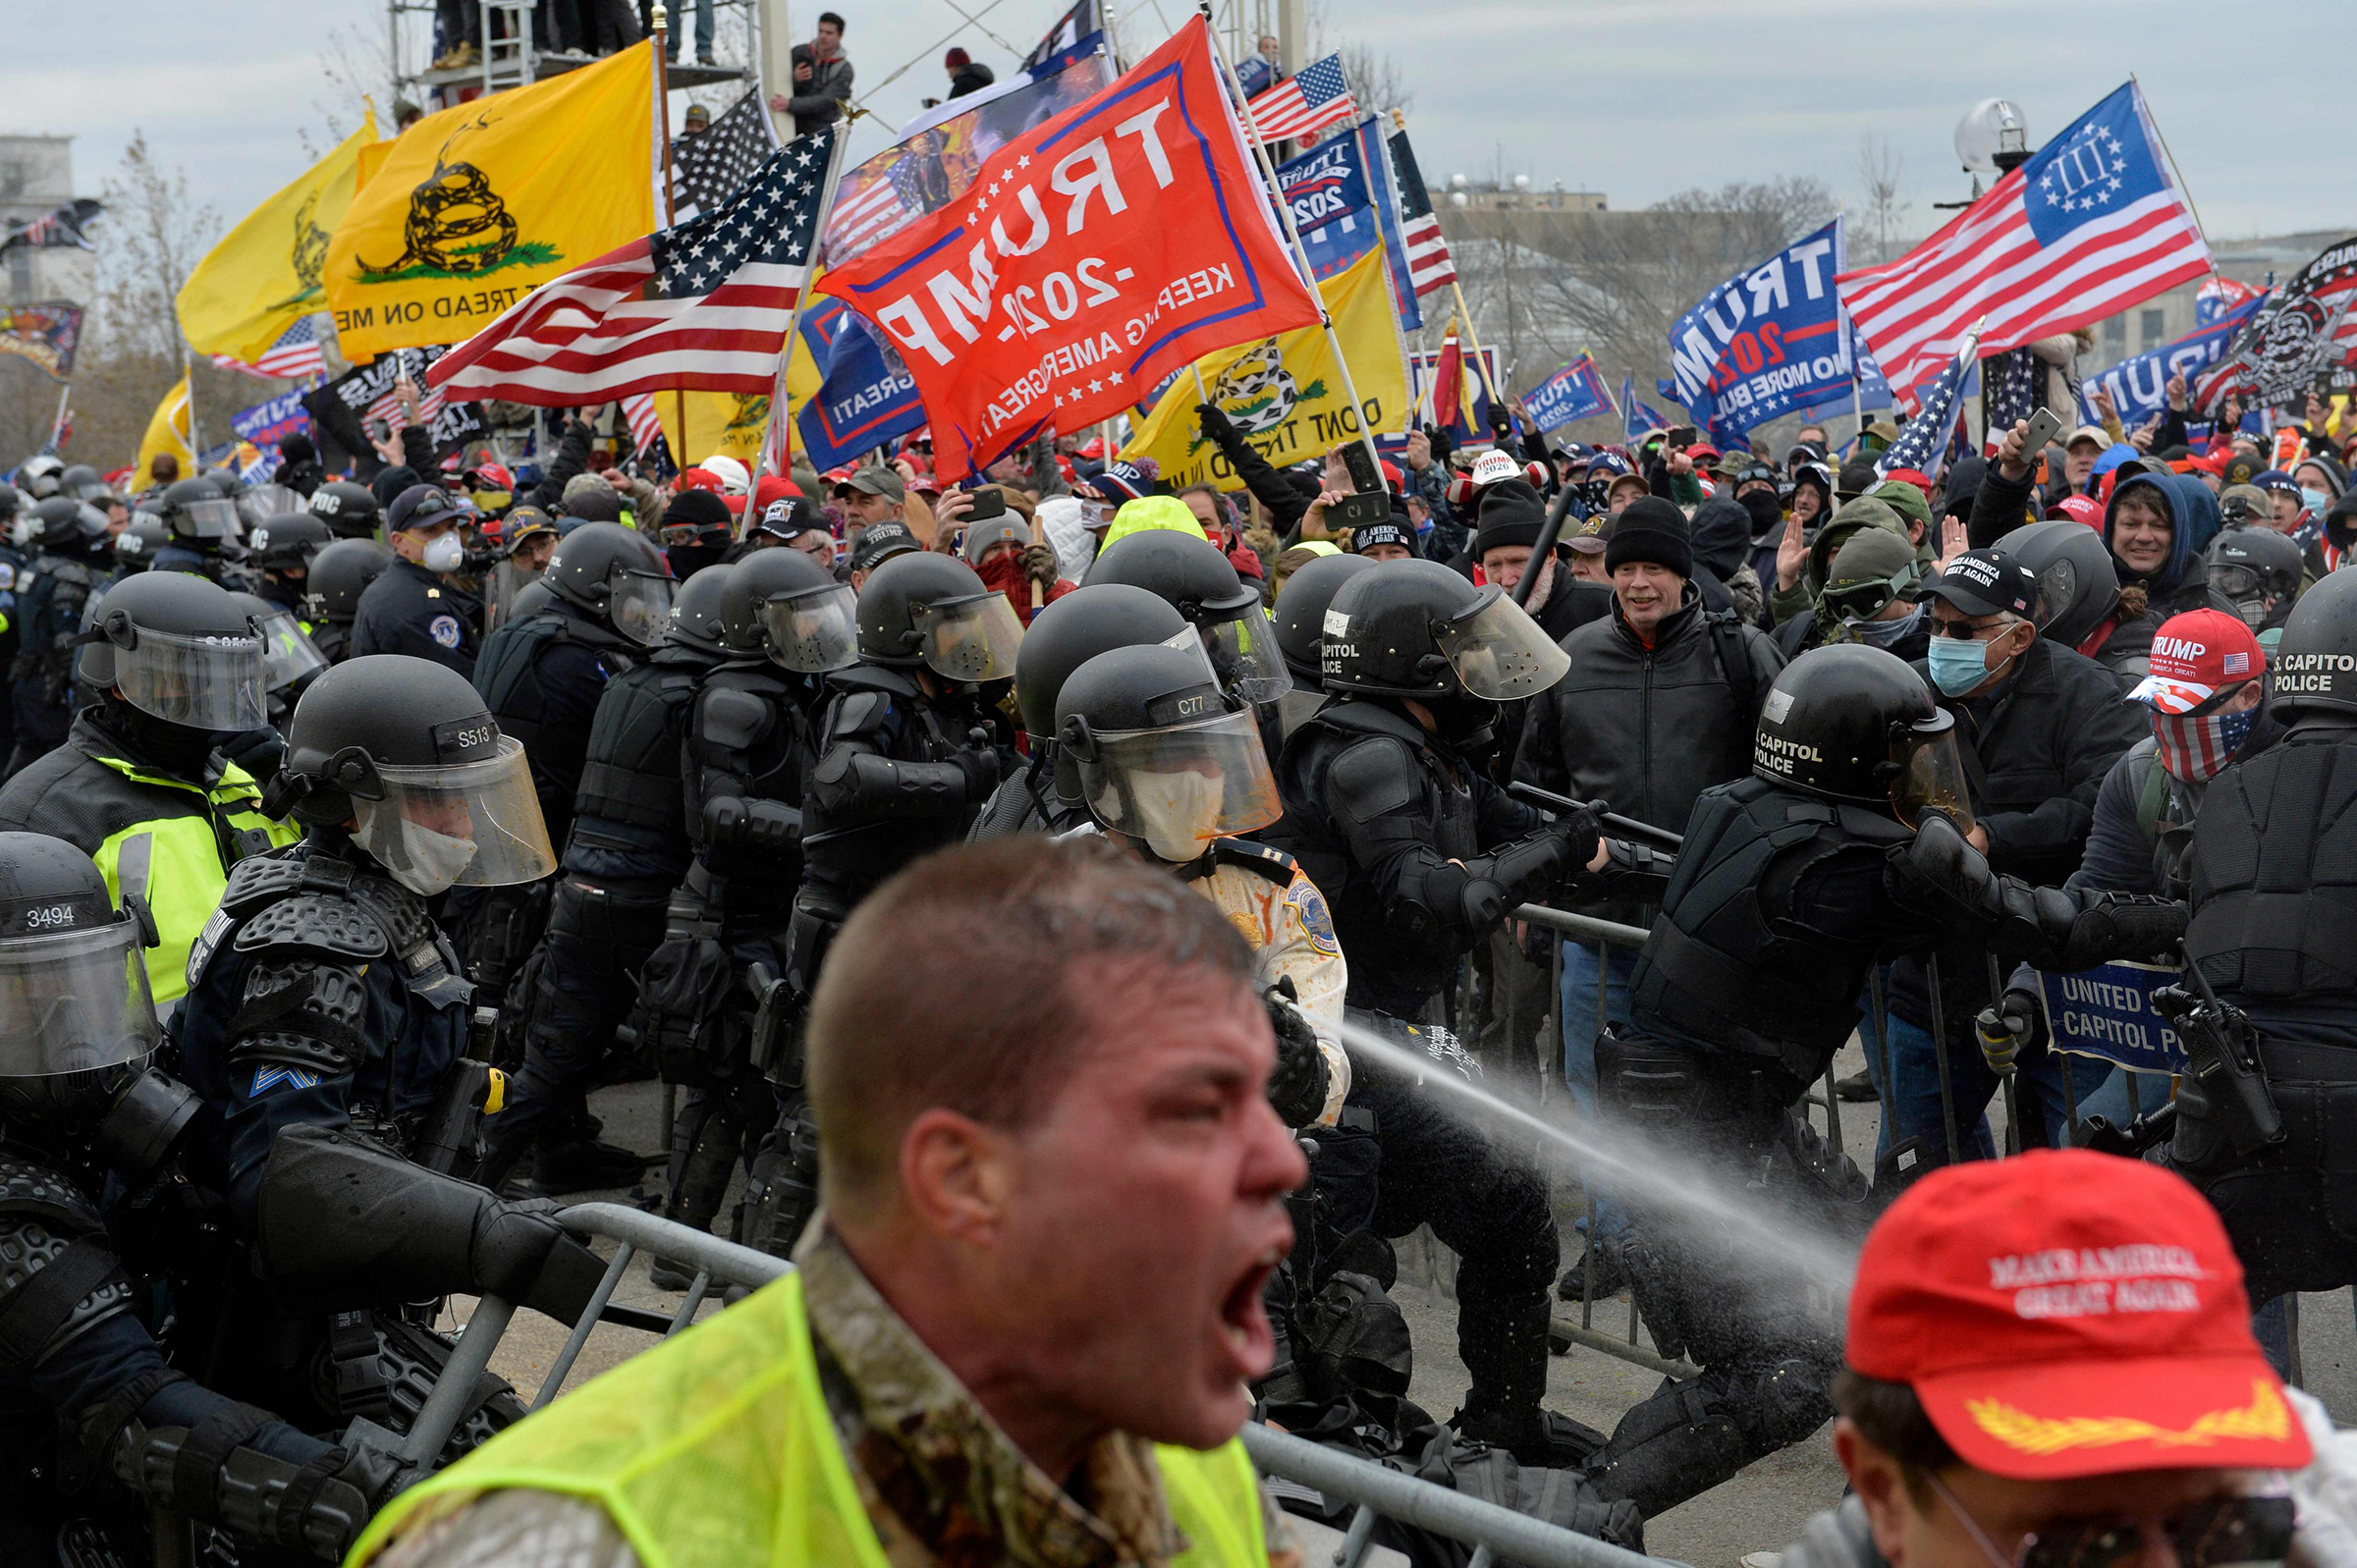 Trump supporters clash with police and security forces as people try to storm the Capitol building in Washington D.C. on Jan. 6, 2021.  (Joseph Prezioso—AFP/Getty Images)